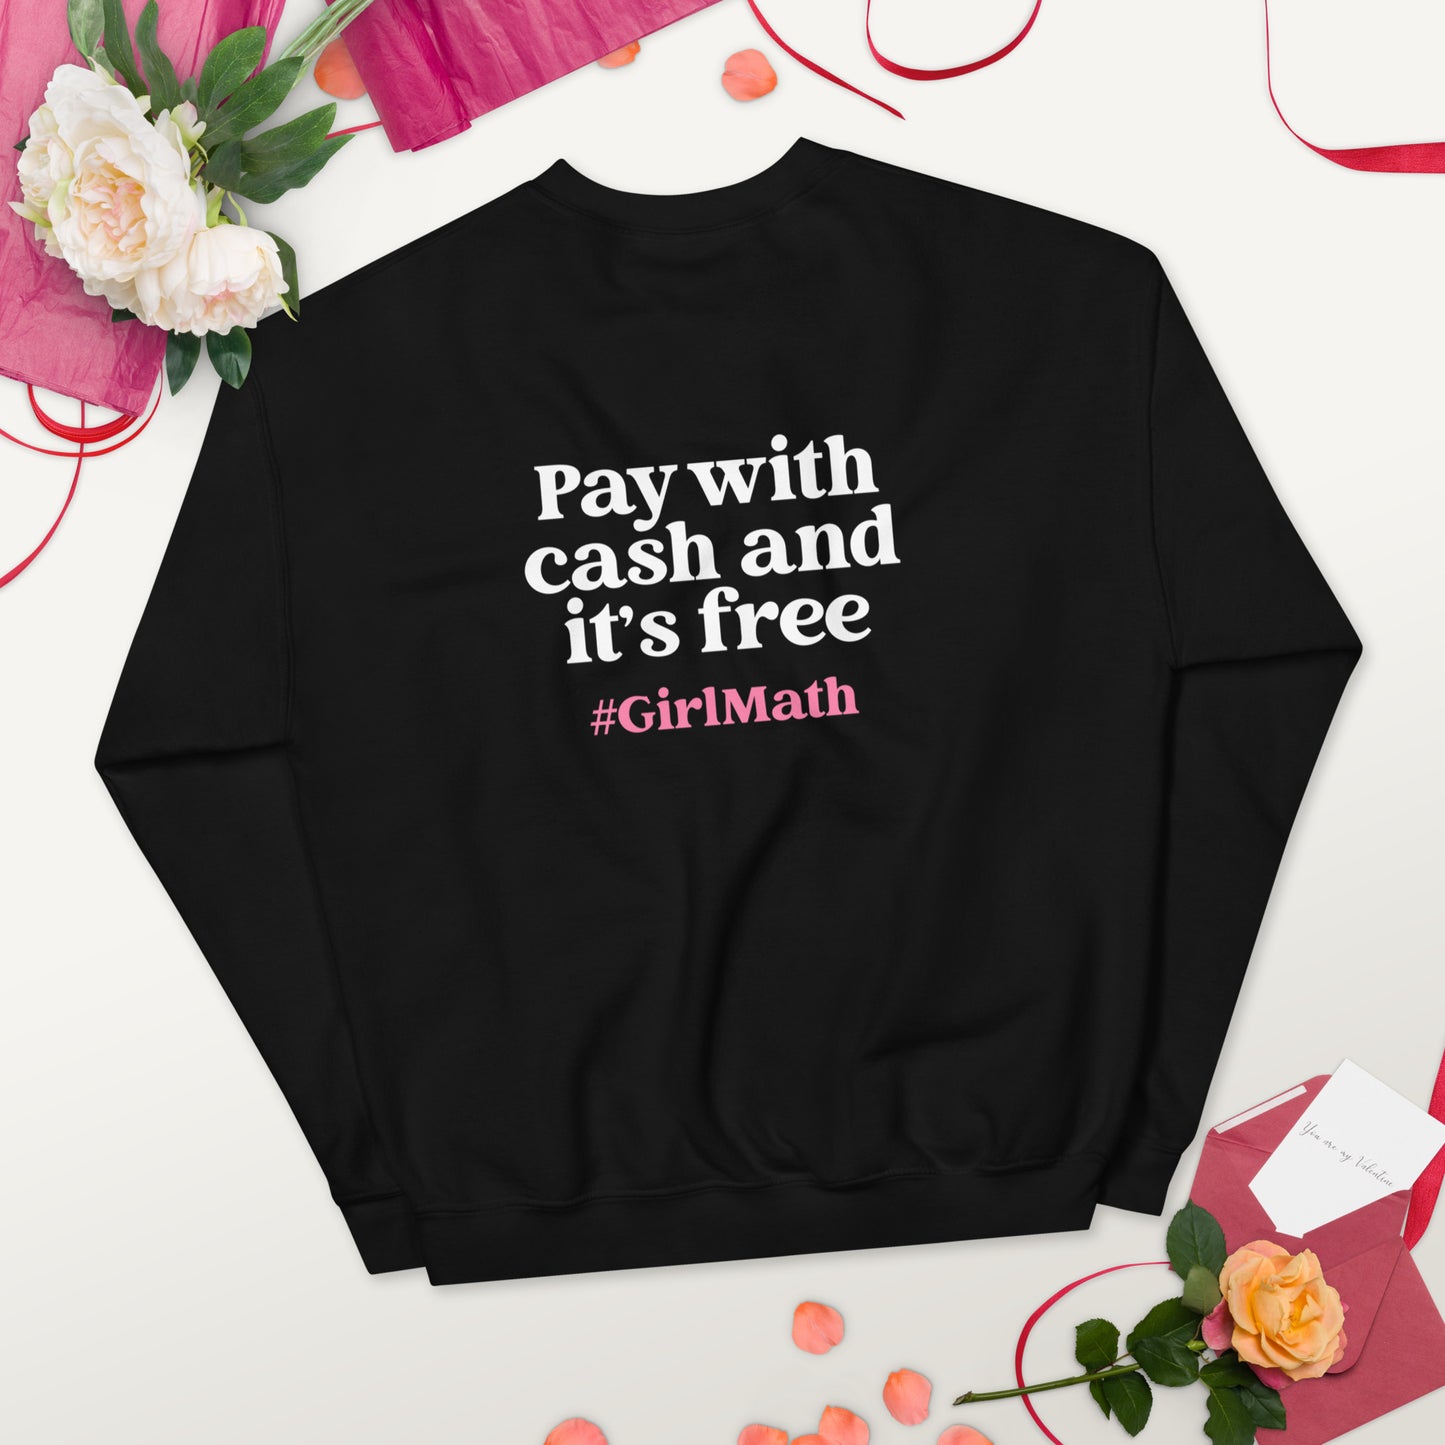 "Magnolia's Morning Mocha" Pink Logo Double-Sided w/Quote [Stay With Me] Unisex Sweatshirt